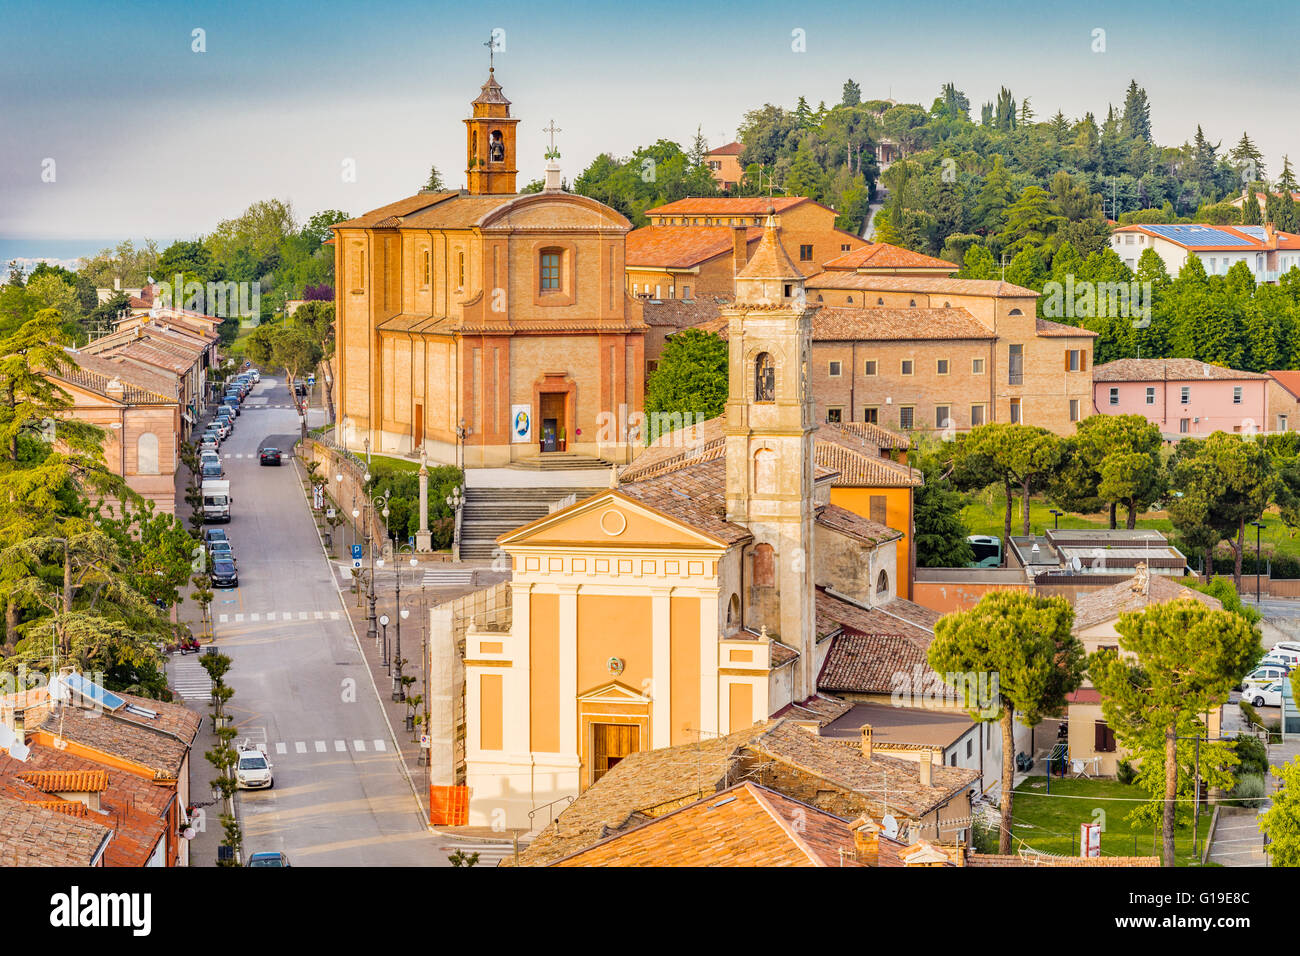 Panorama of the medieval village of Longiano in the Romagna hills near Cesena in Italy, with its ancient buildings and churches and the sea in the distance on the horizon Stock Photo